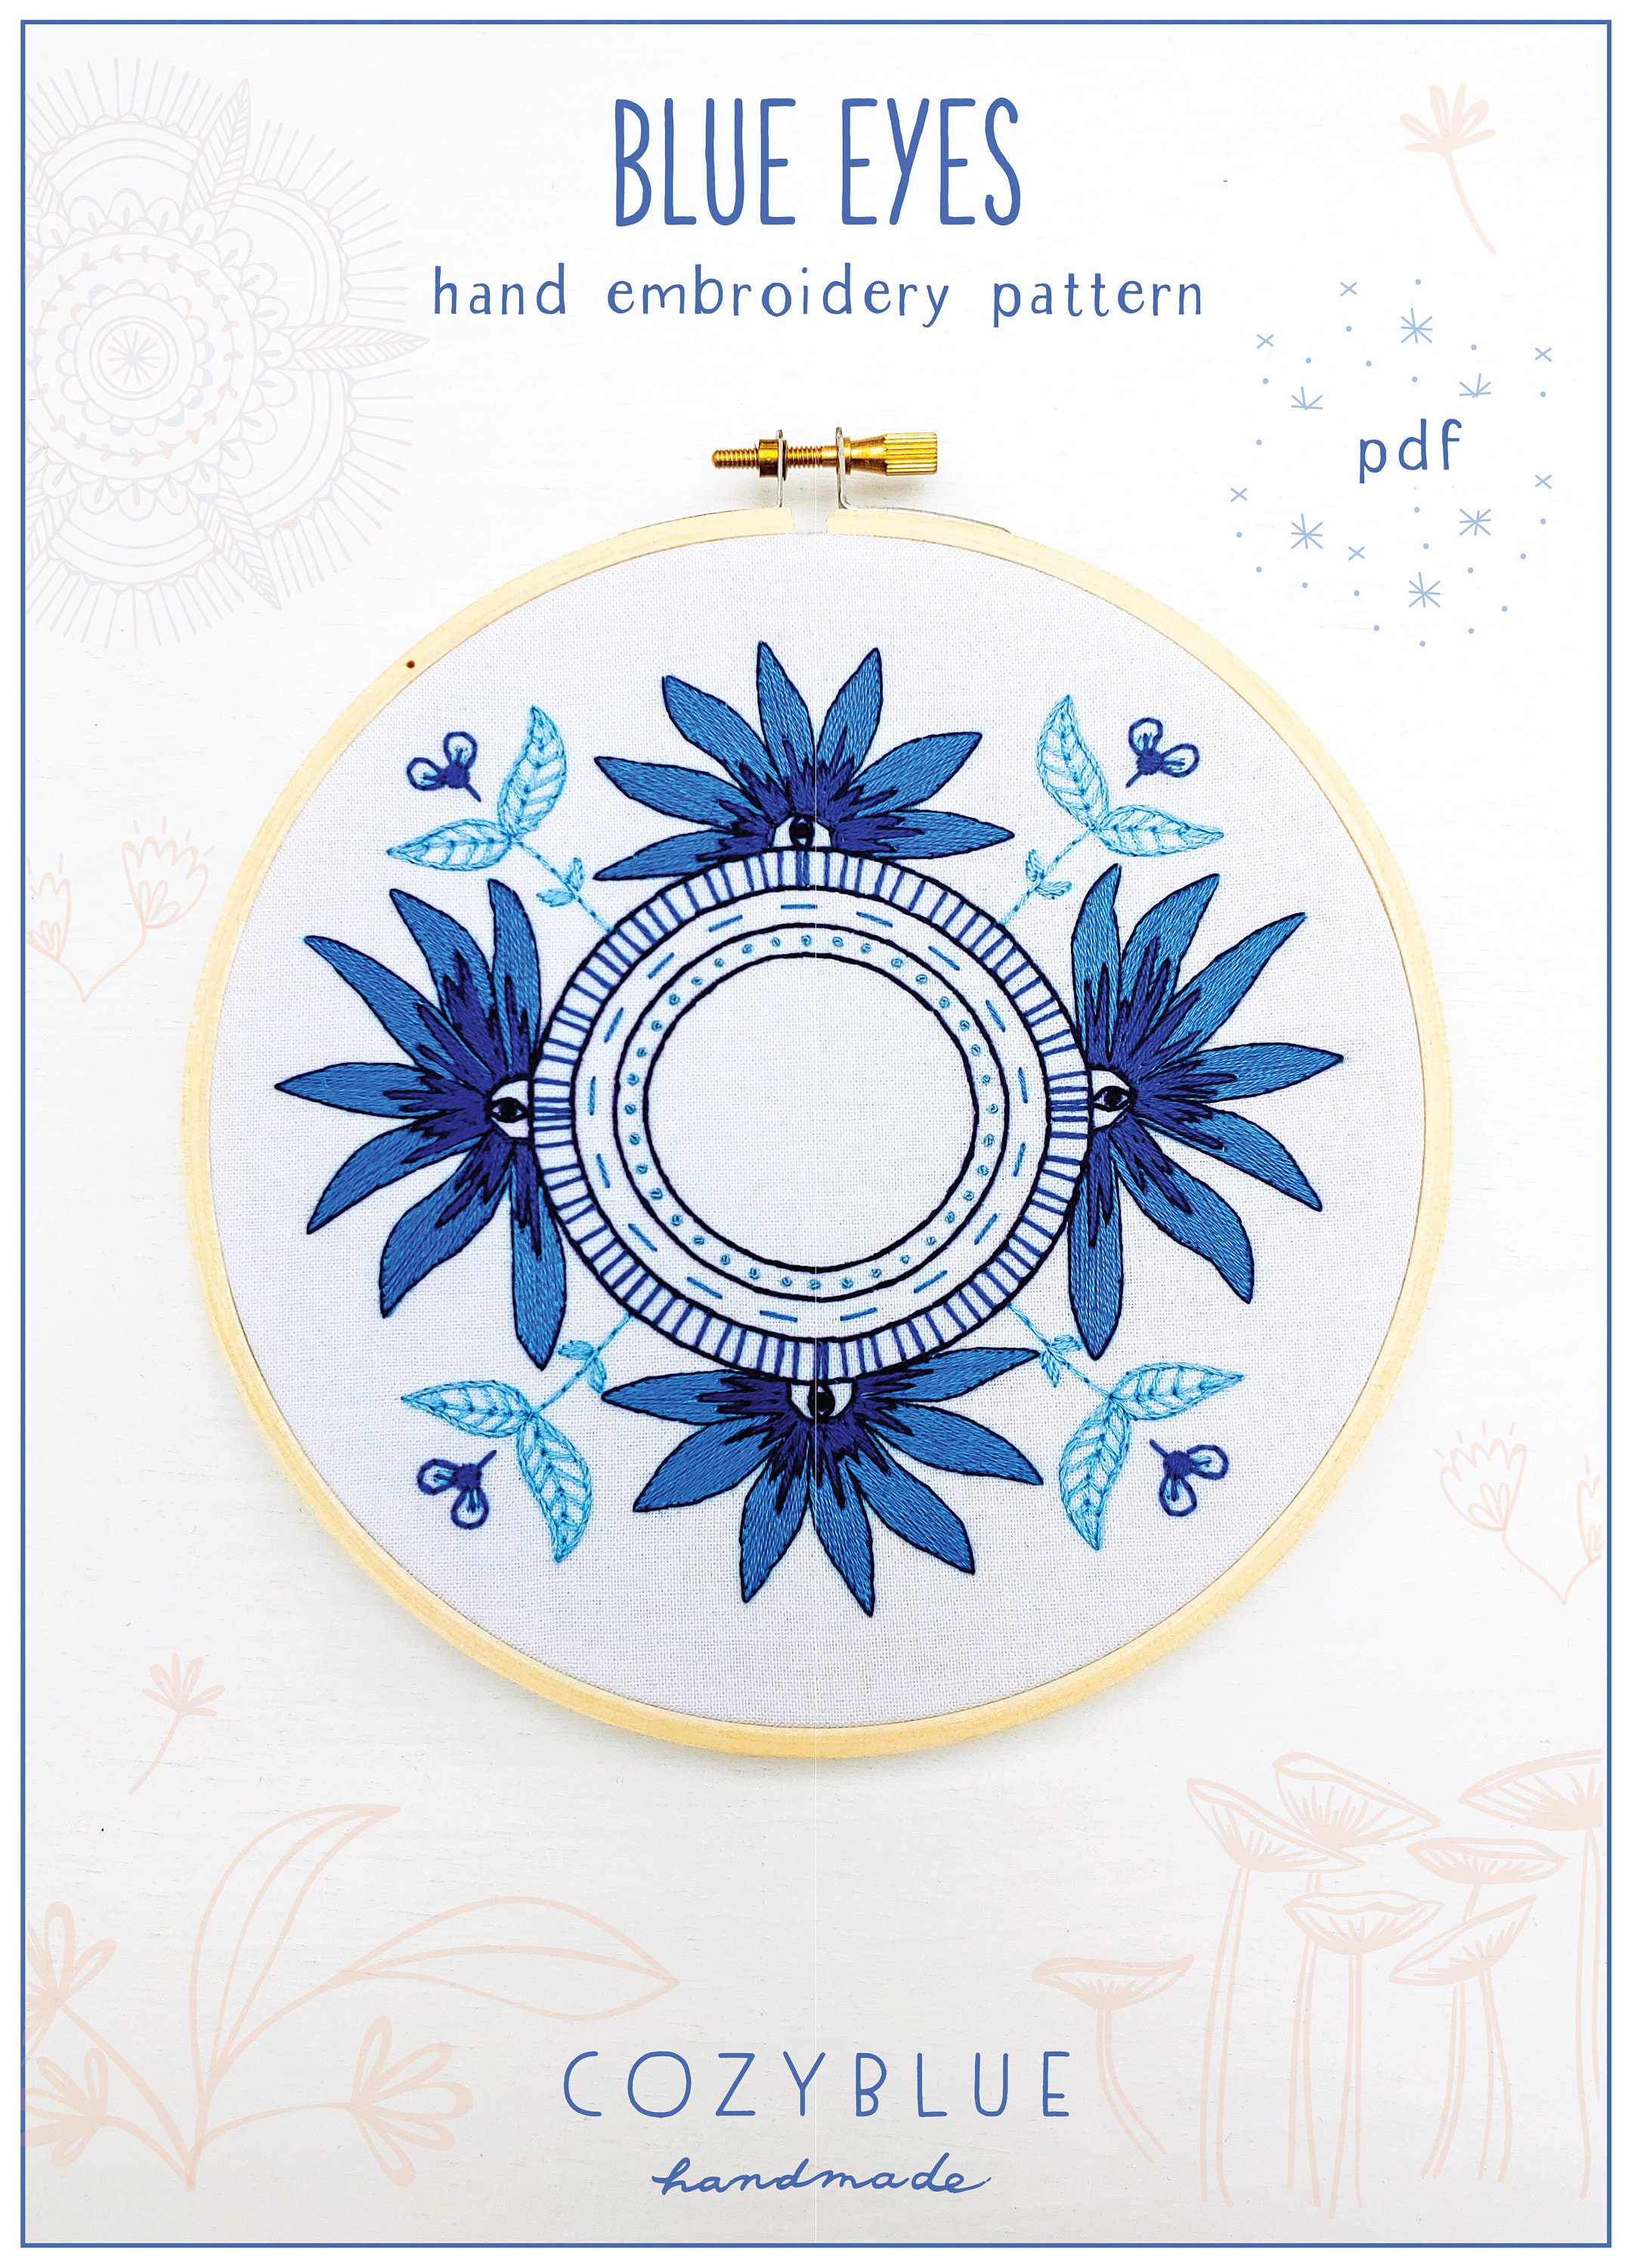 BLUE EYES Pdf Embroidery Pattern, Embroidery Hoop Art, Hand Embroidery,  Blue Flowers, Floral Frame, Flowers With Eyes, Mandala Design, Eye -  UK